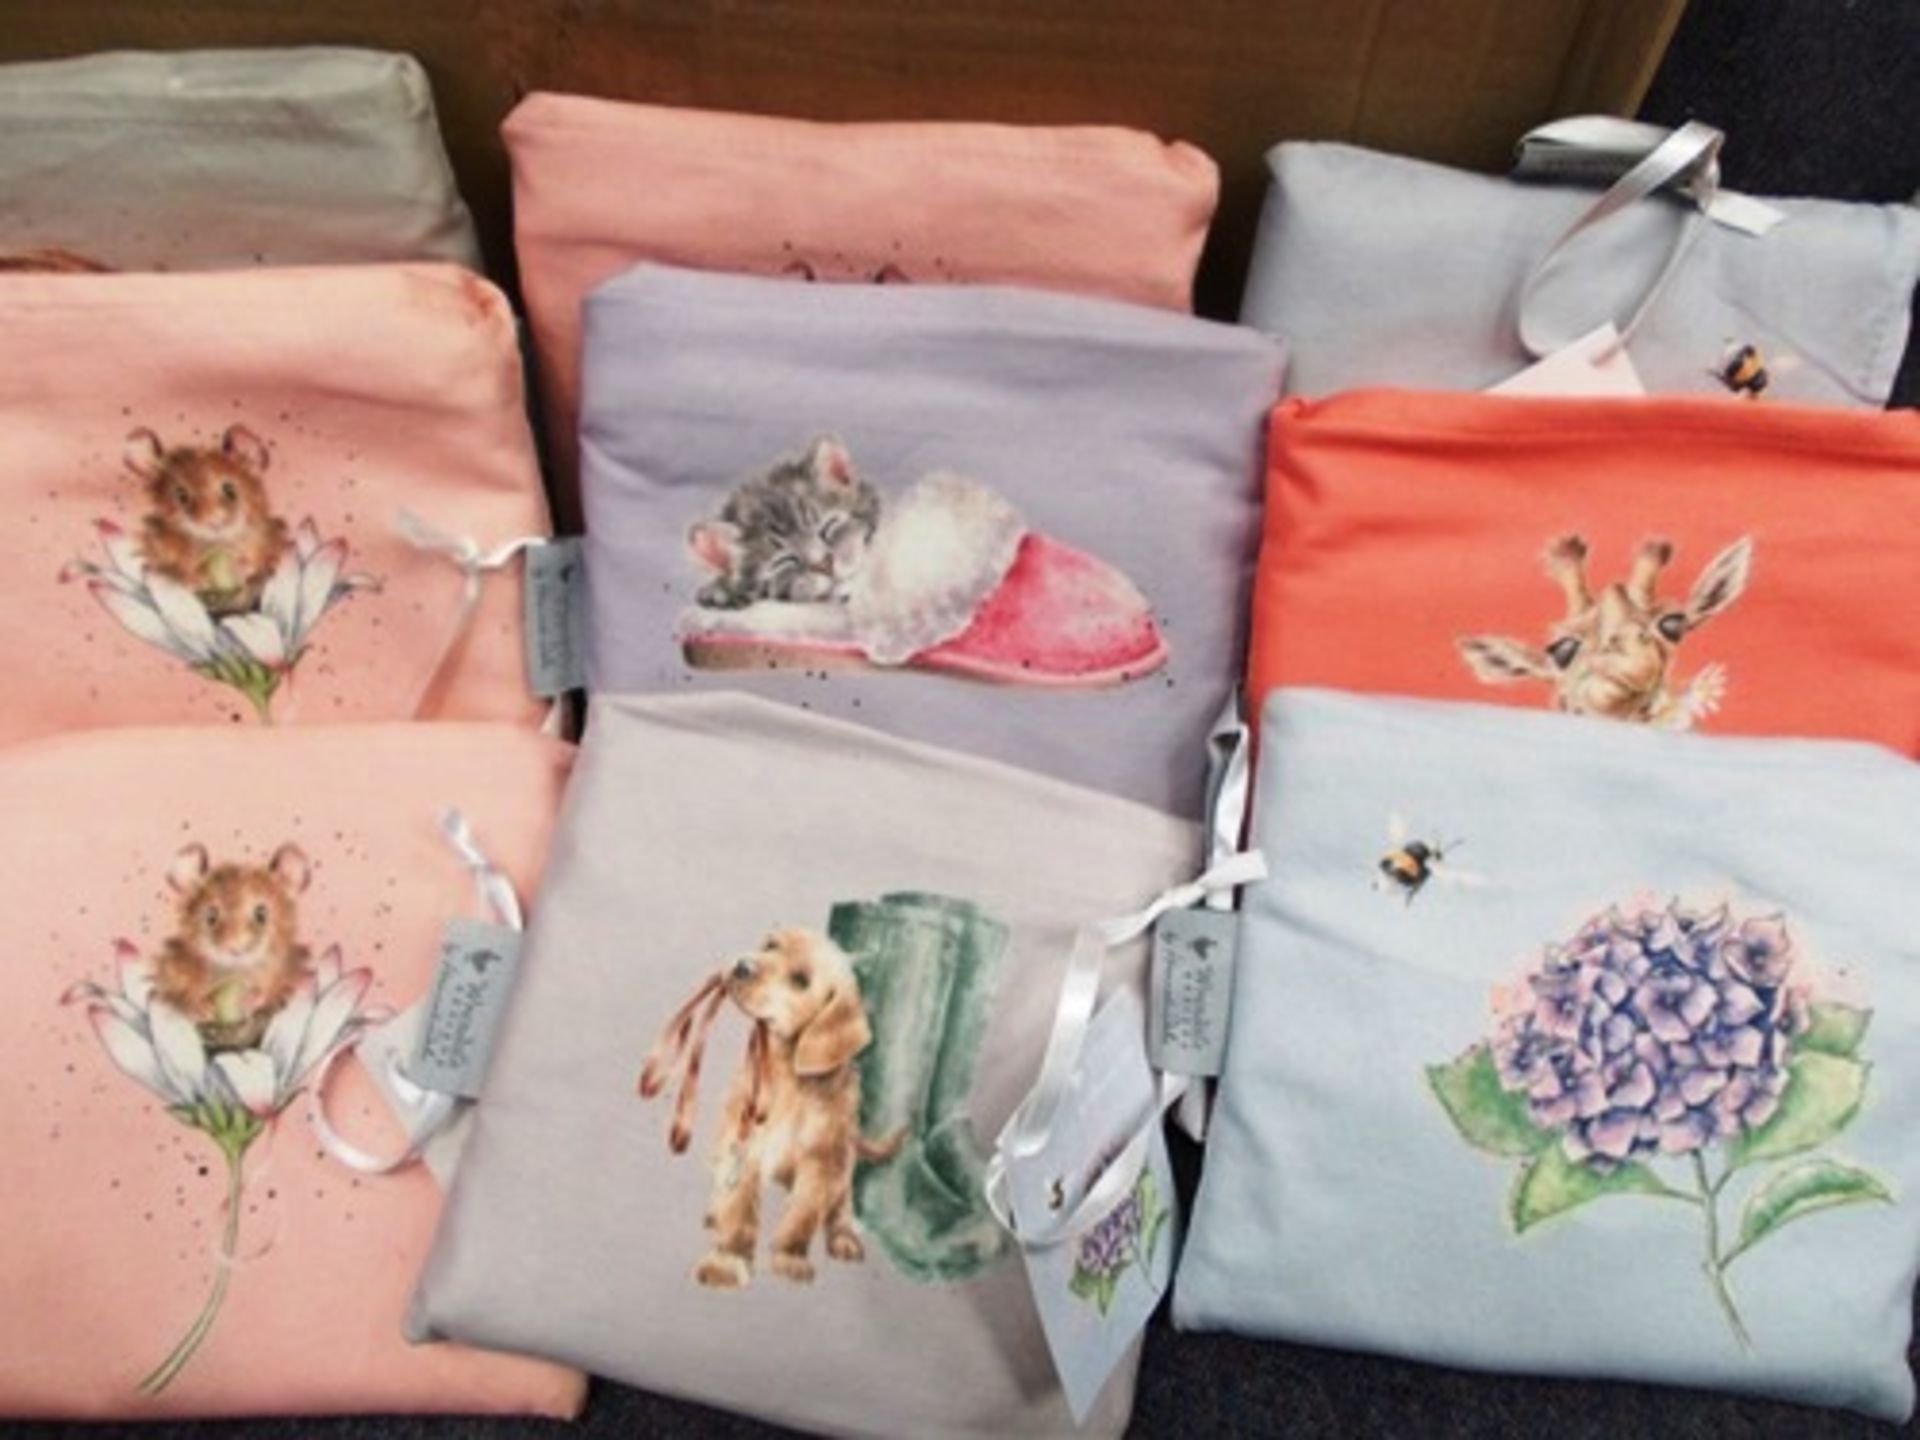 9 x Wrendale handmade foldable shopping bags, size 39 x 44cm unfolded, RRP £8.99 each - New with